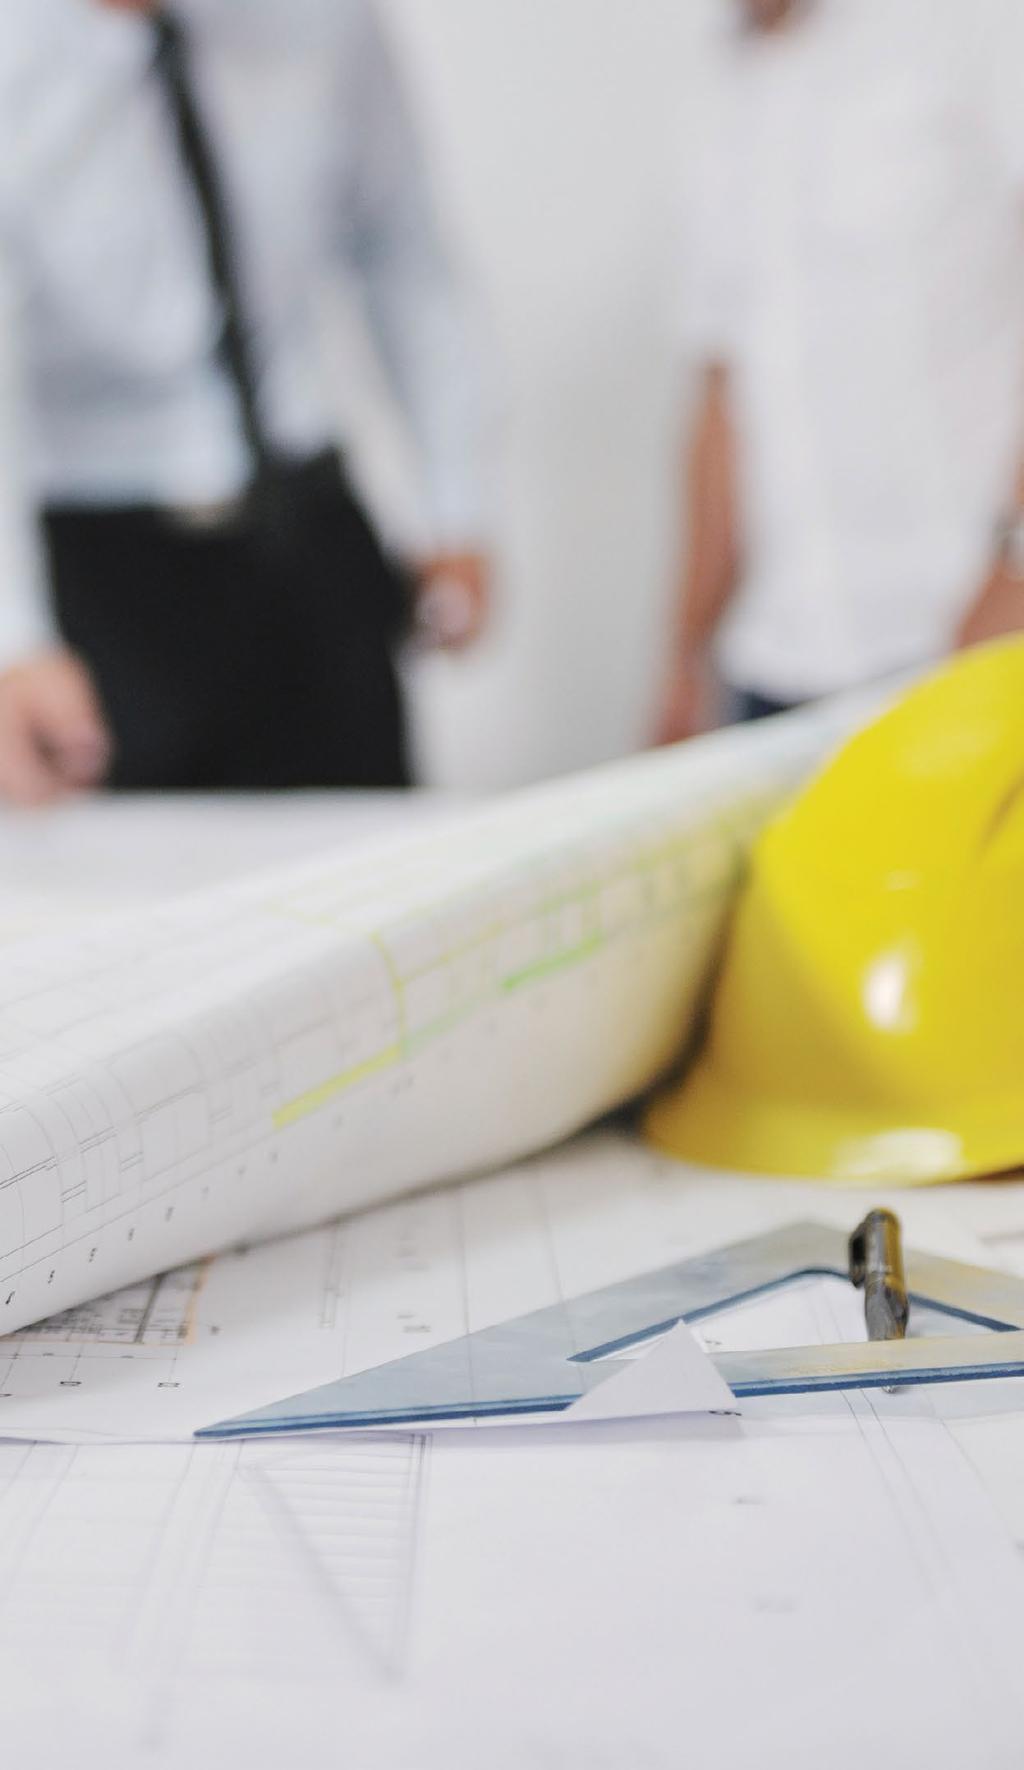 Everything from the site plan, to punch lists and RFIs, to detailed call-outs are part of construction drawings the life blood of the AEC industry.